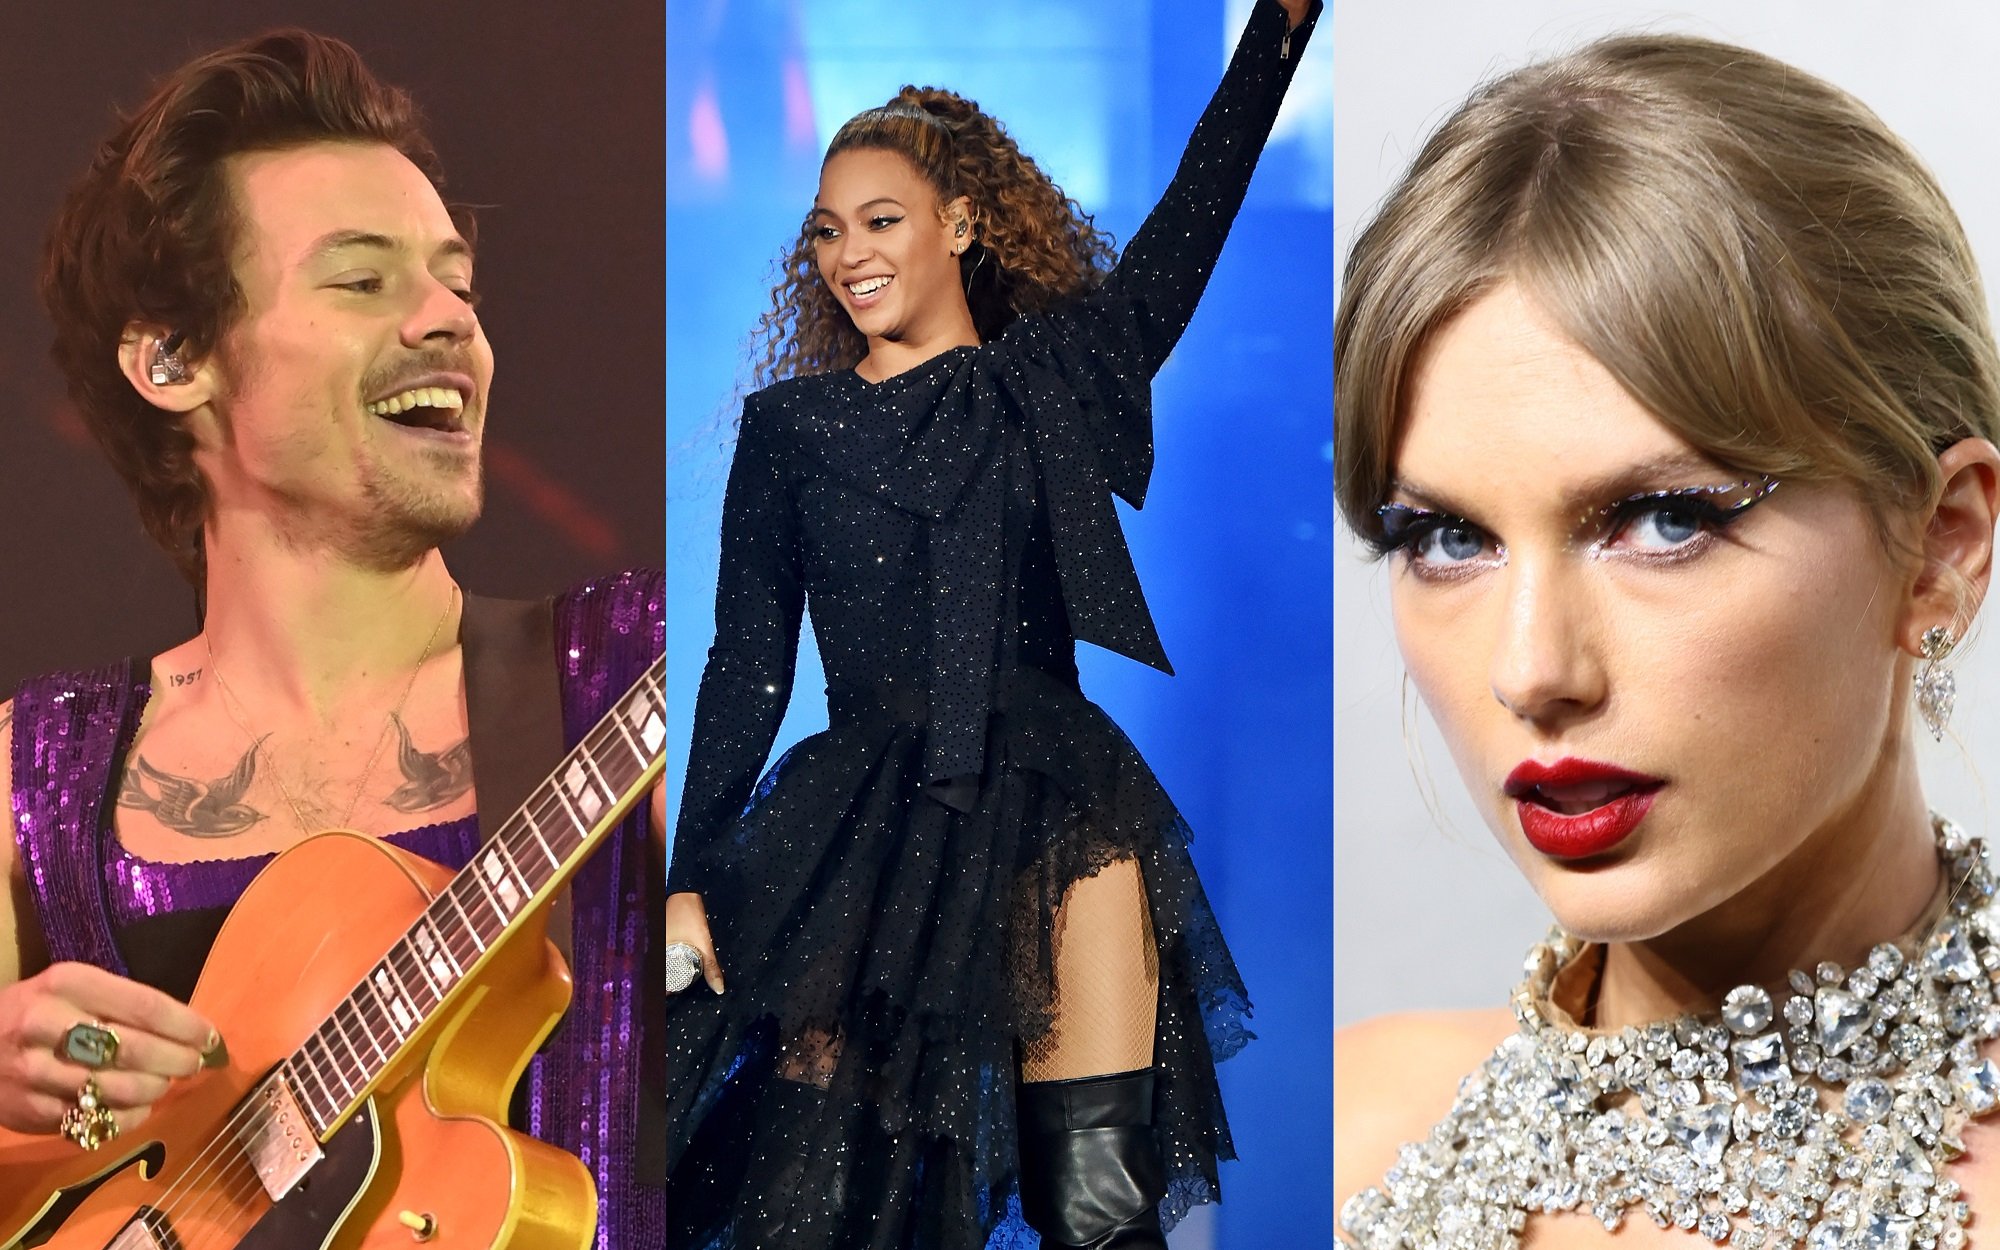 A joined photo of Harry Styles, Beyoncé, and Taylor Swift